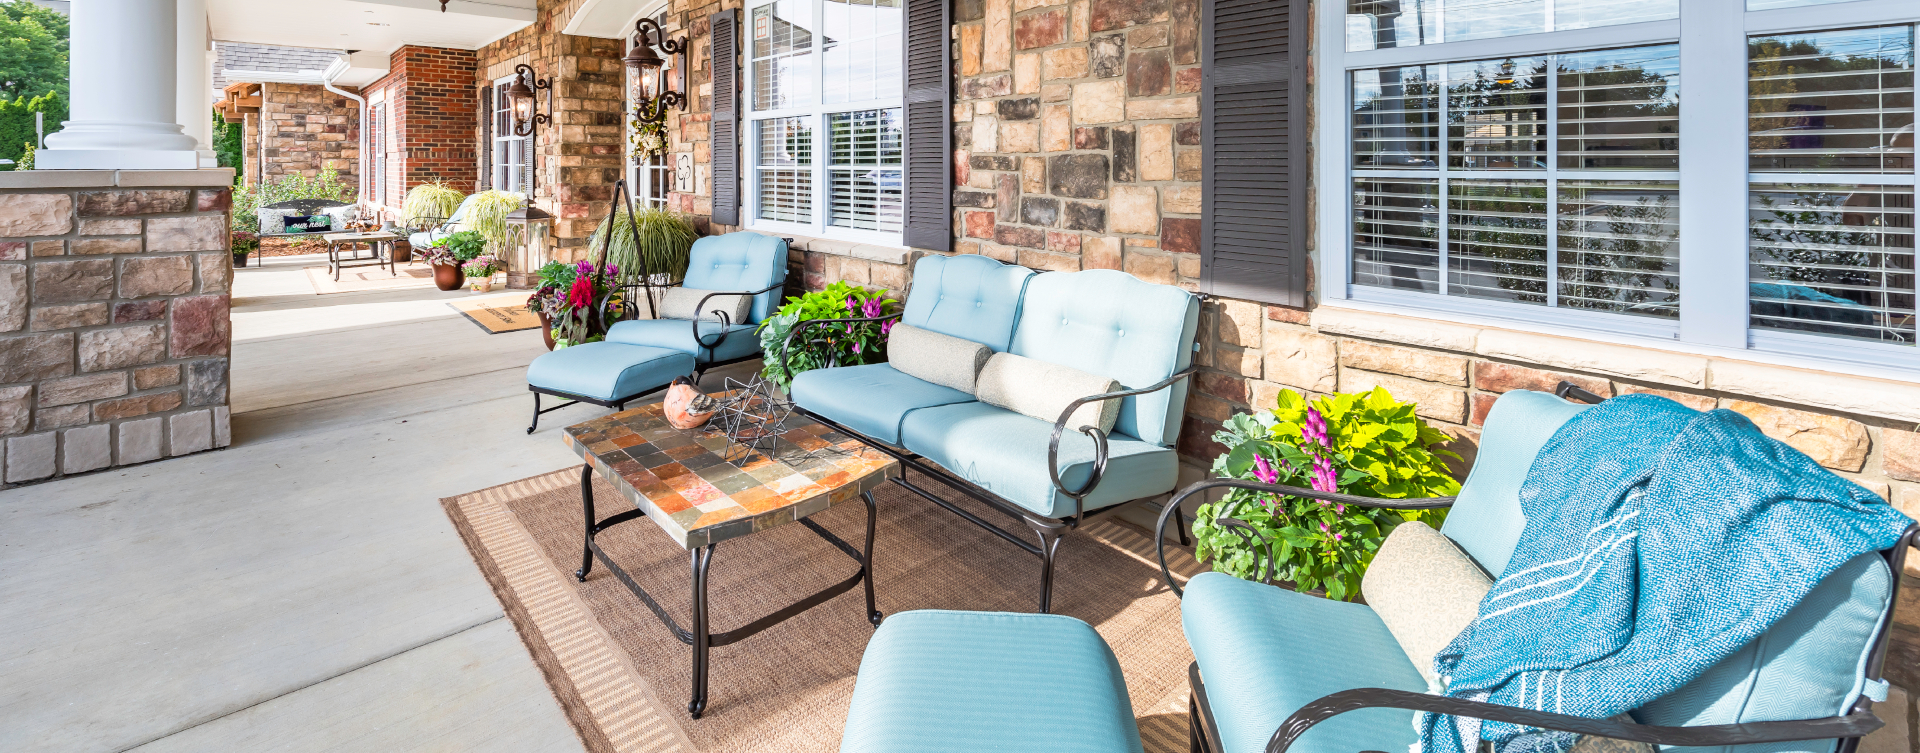 Relax in your favorite chair on the porch at Bickford of Shelby Township